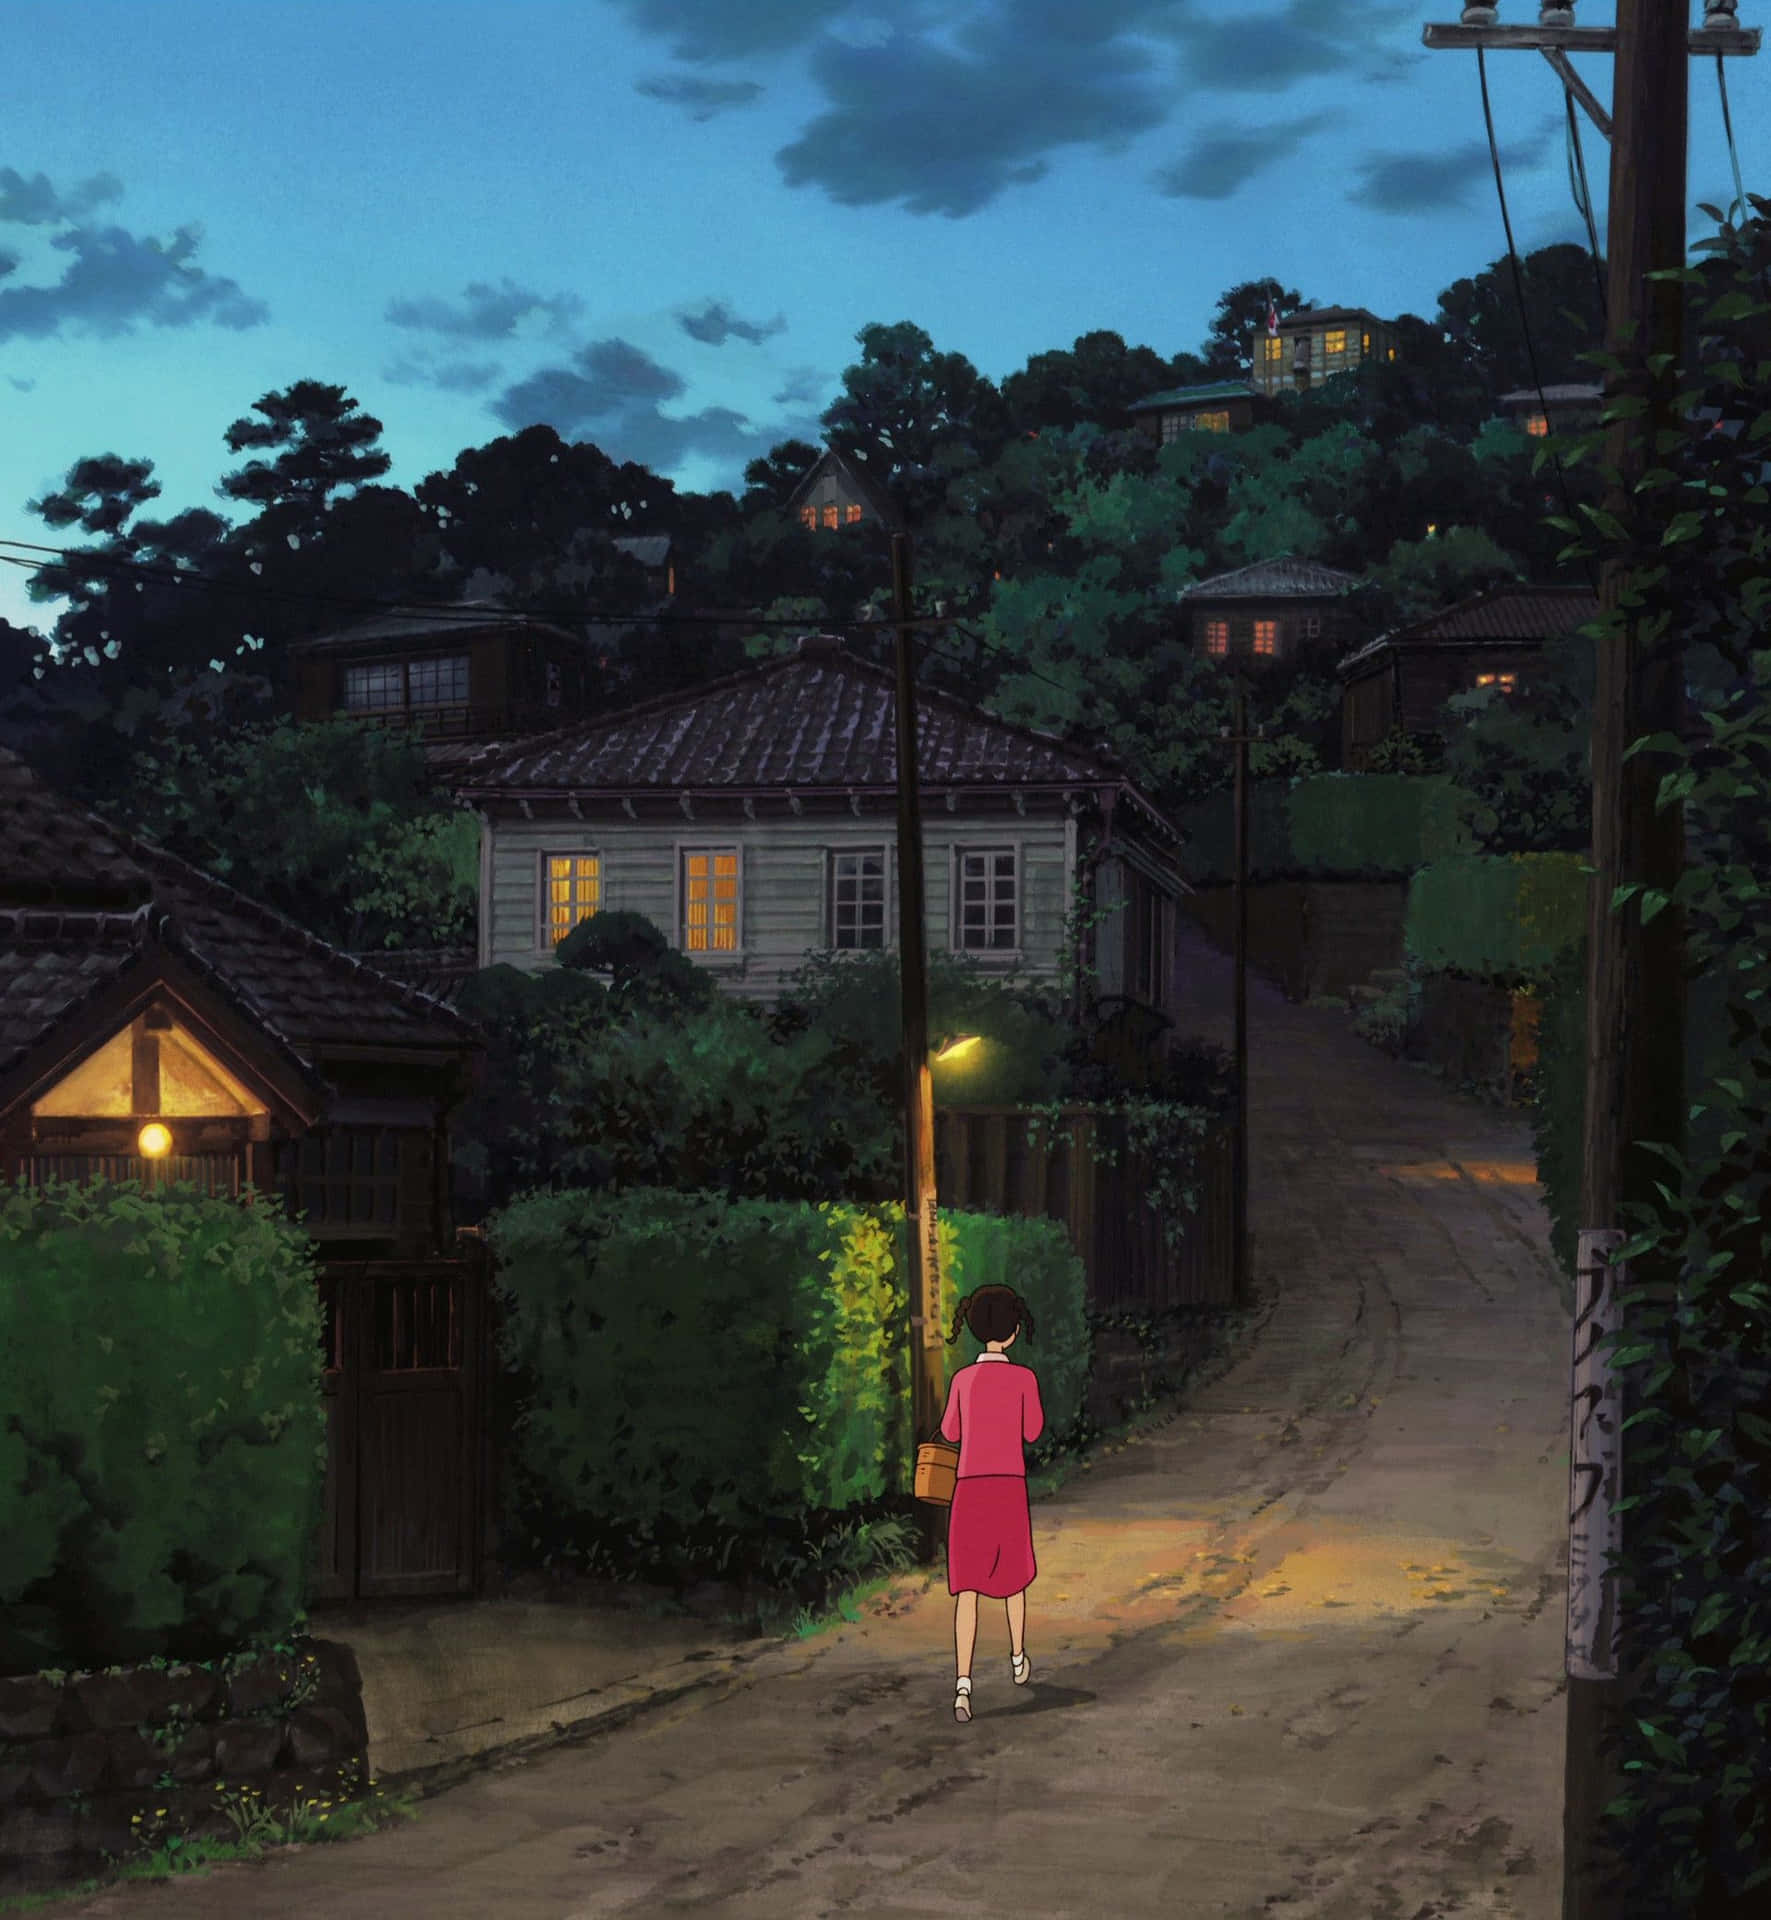 Take a stroll through “From Up On Poppy Hill”